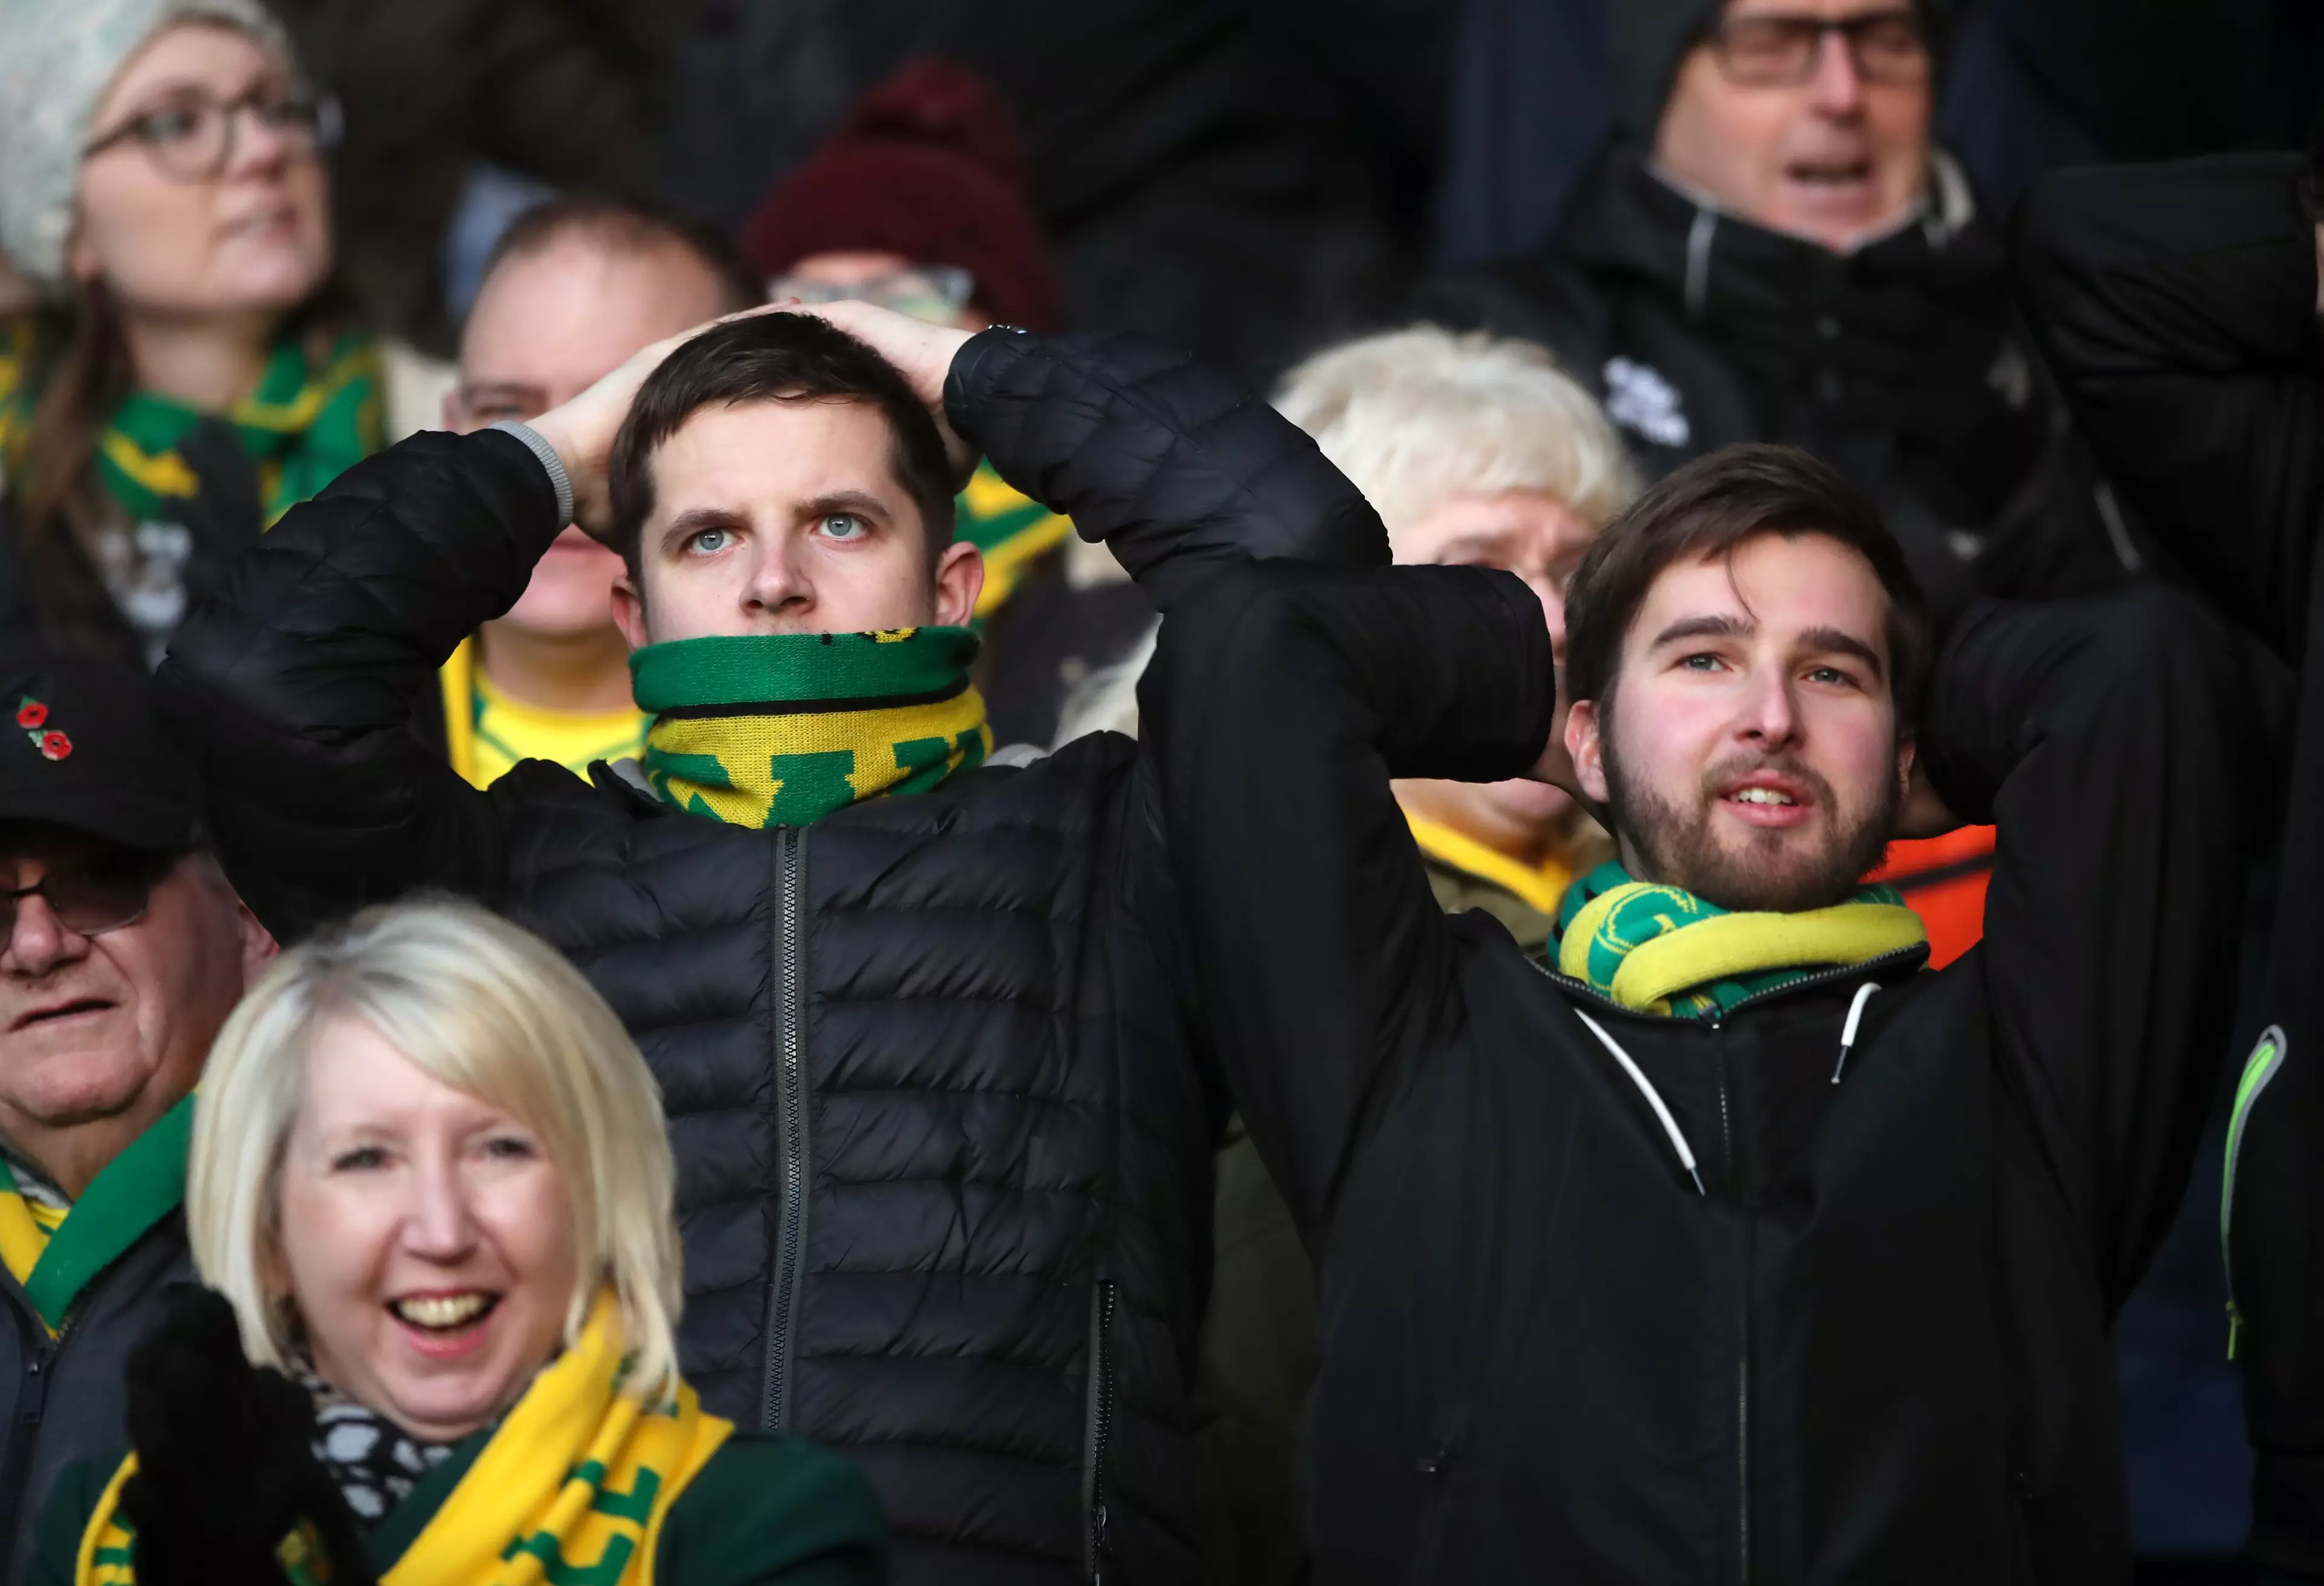 Norwich fans haven't had much to celebrate on the pitch either. Image: PA Images